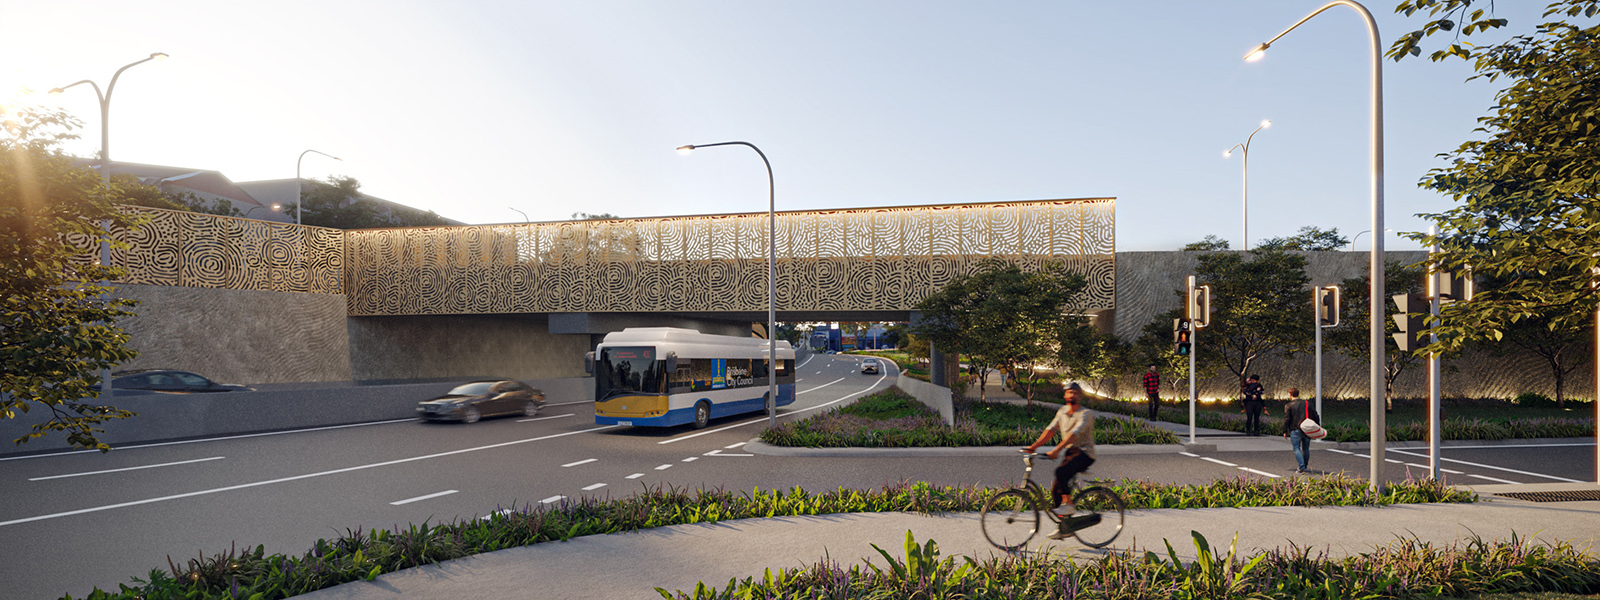 Moggill Road Corridor Upgrade Project – Stage 1 (Indooroopilly Roundabout Upgrade)